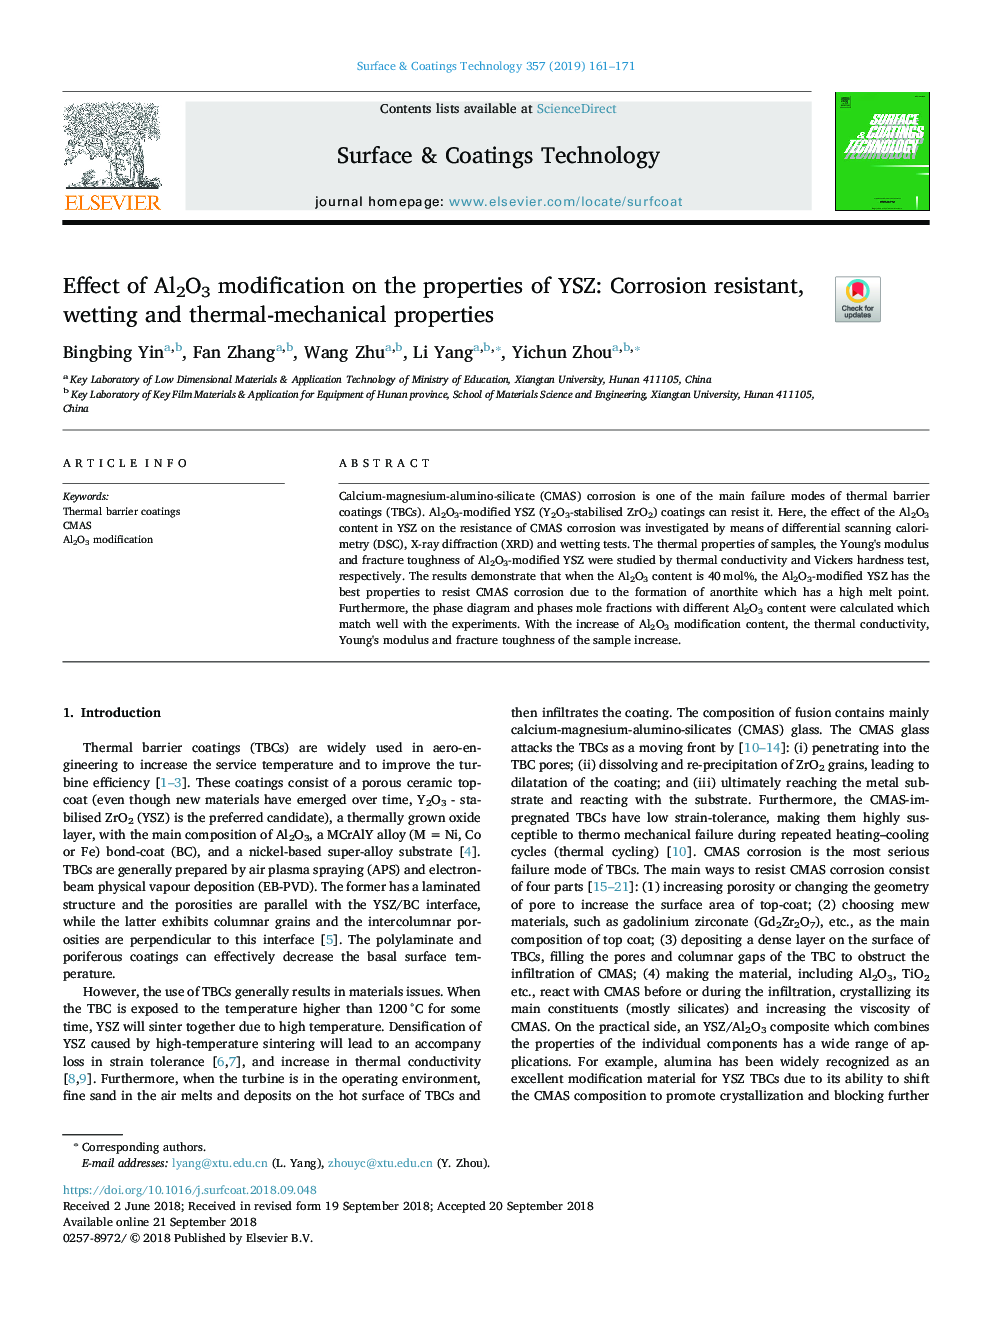 Effect of Al2O3 modification on the properties of YSZ: Corrosion resistant, wetting and thermal-mechanical properties